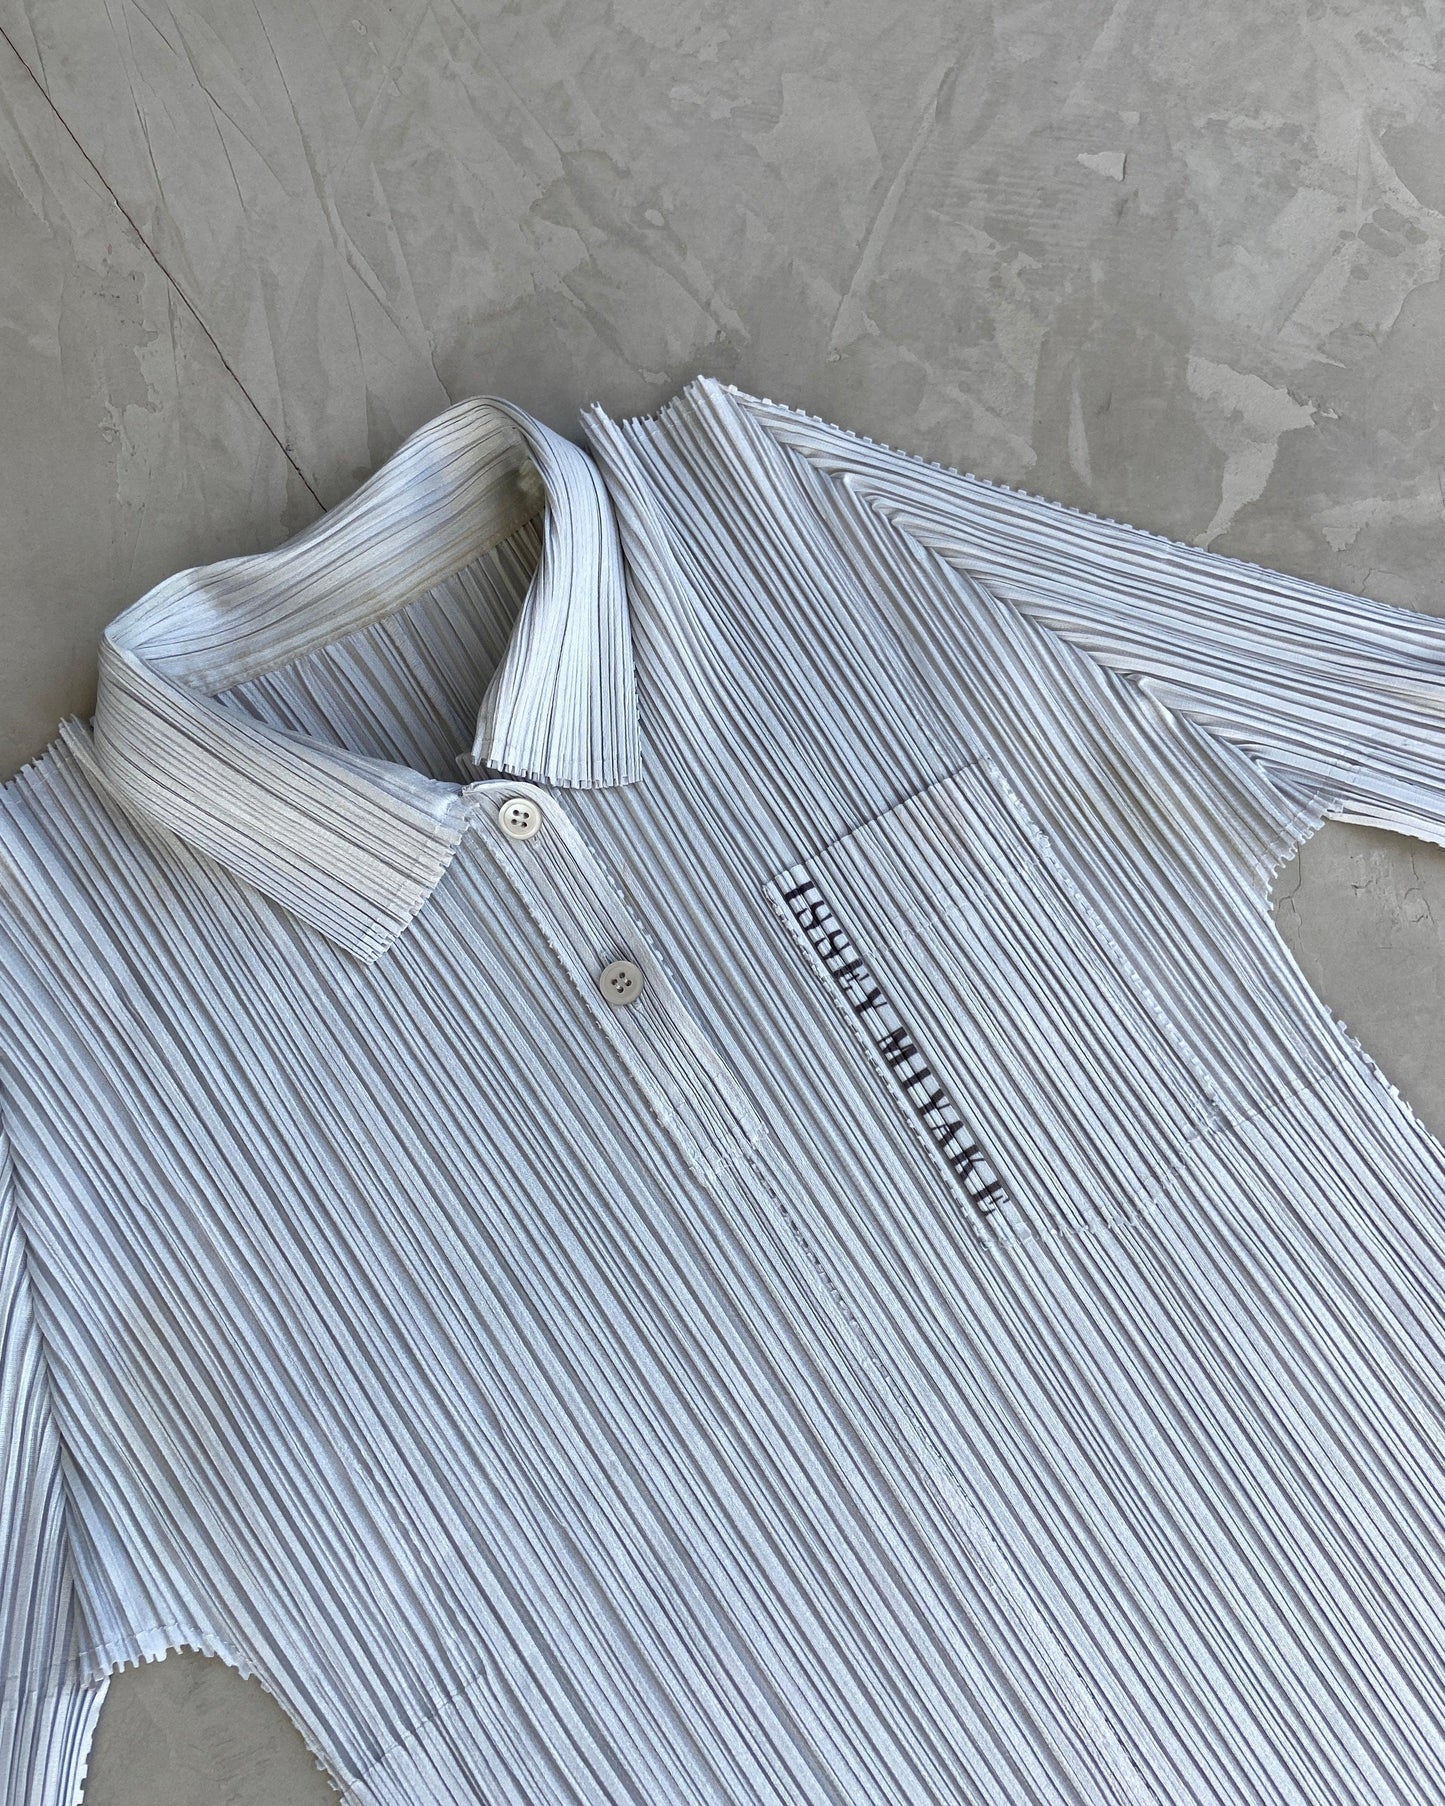 ISSEY MIYAKE PLEATS PLEASE SHIRT TOP - S/M - Known Source